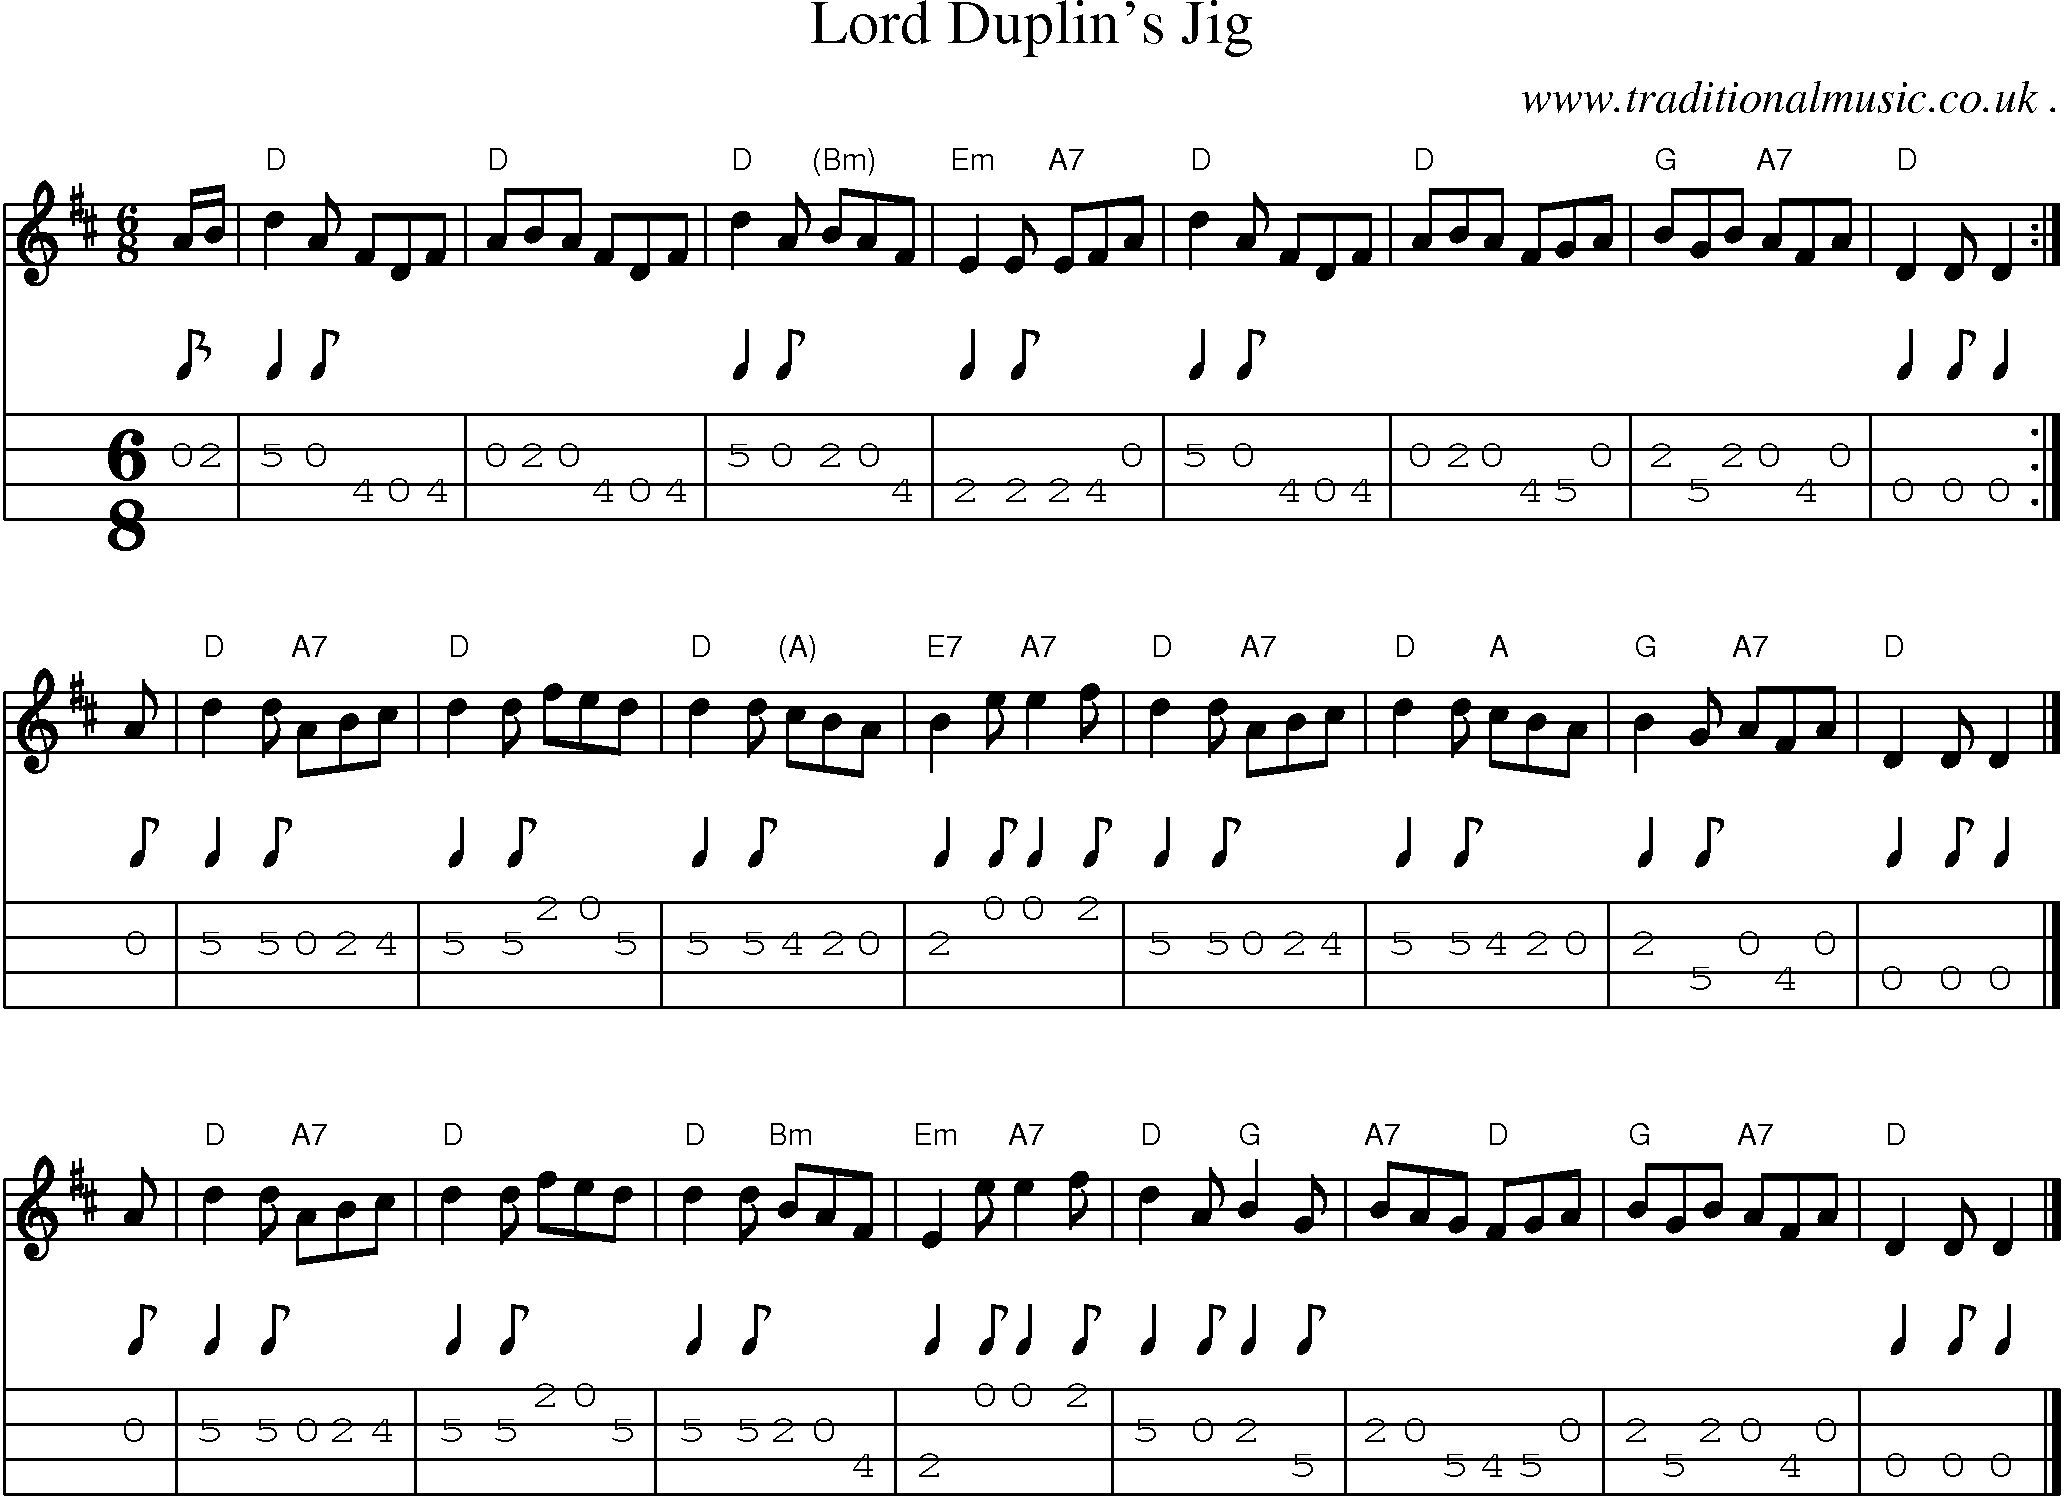 Sheet-music  score, Chords and Mandolin Tabs for Lord Duplins Jig